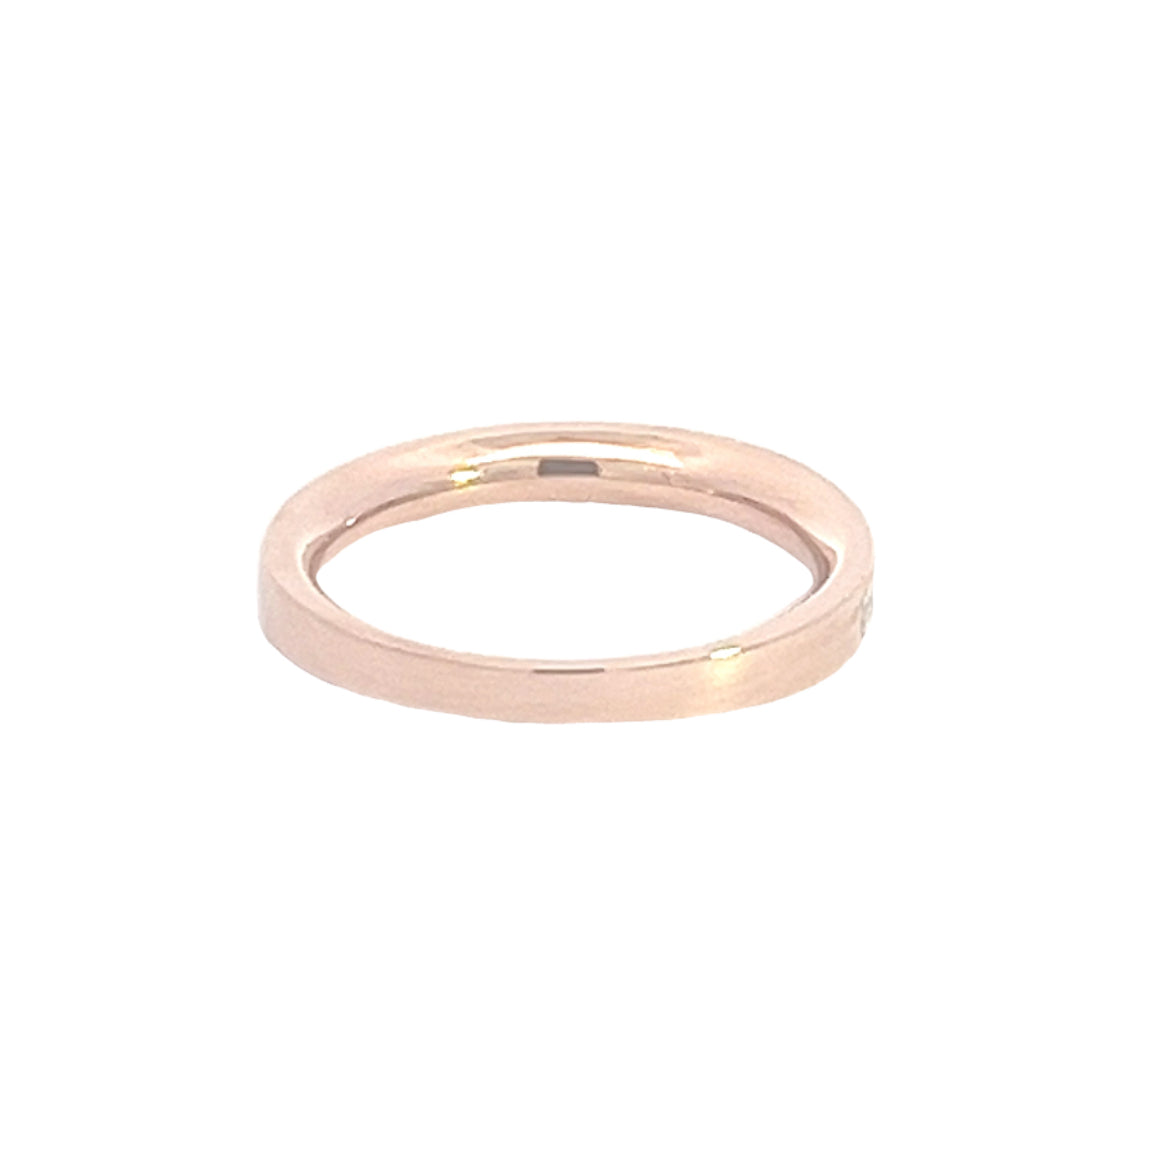 Rose gold baguette channel wedding band 1 ctw